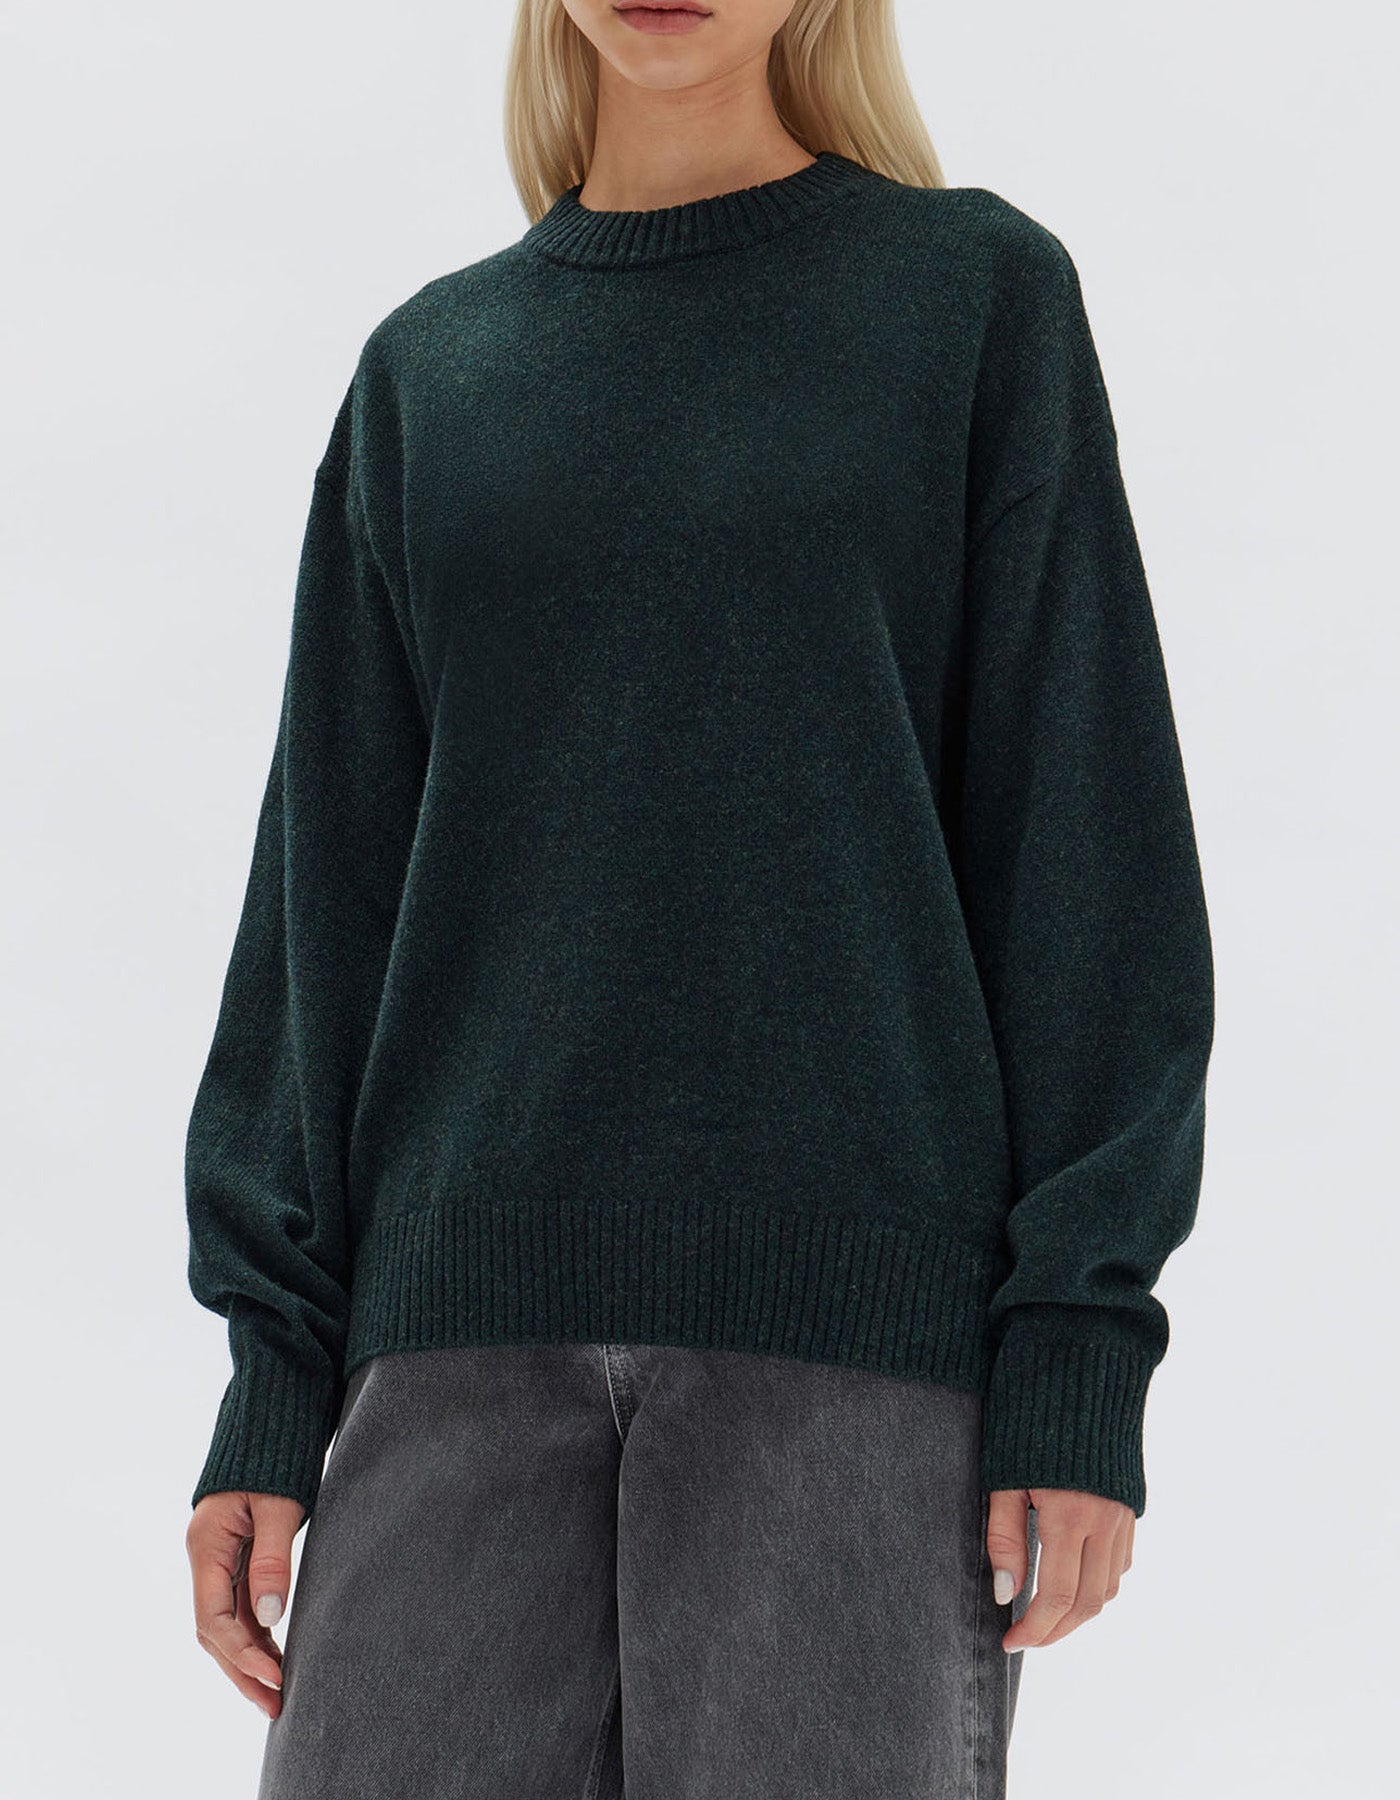 Assembly Label Iris Knit Forest